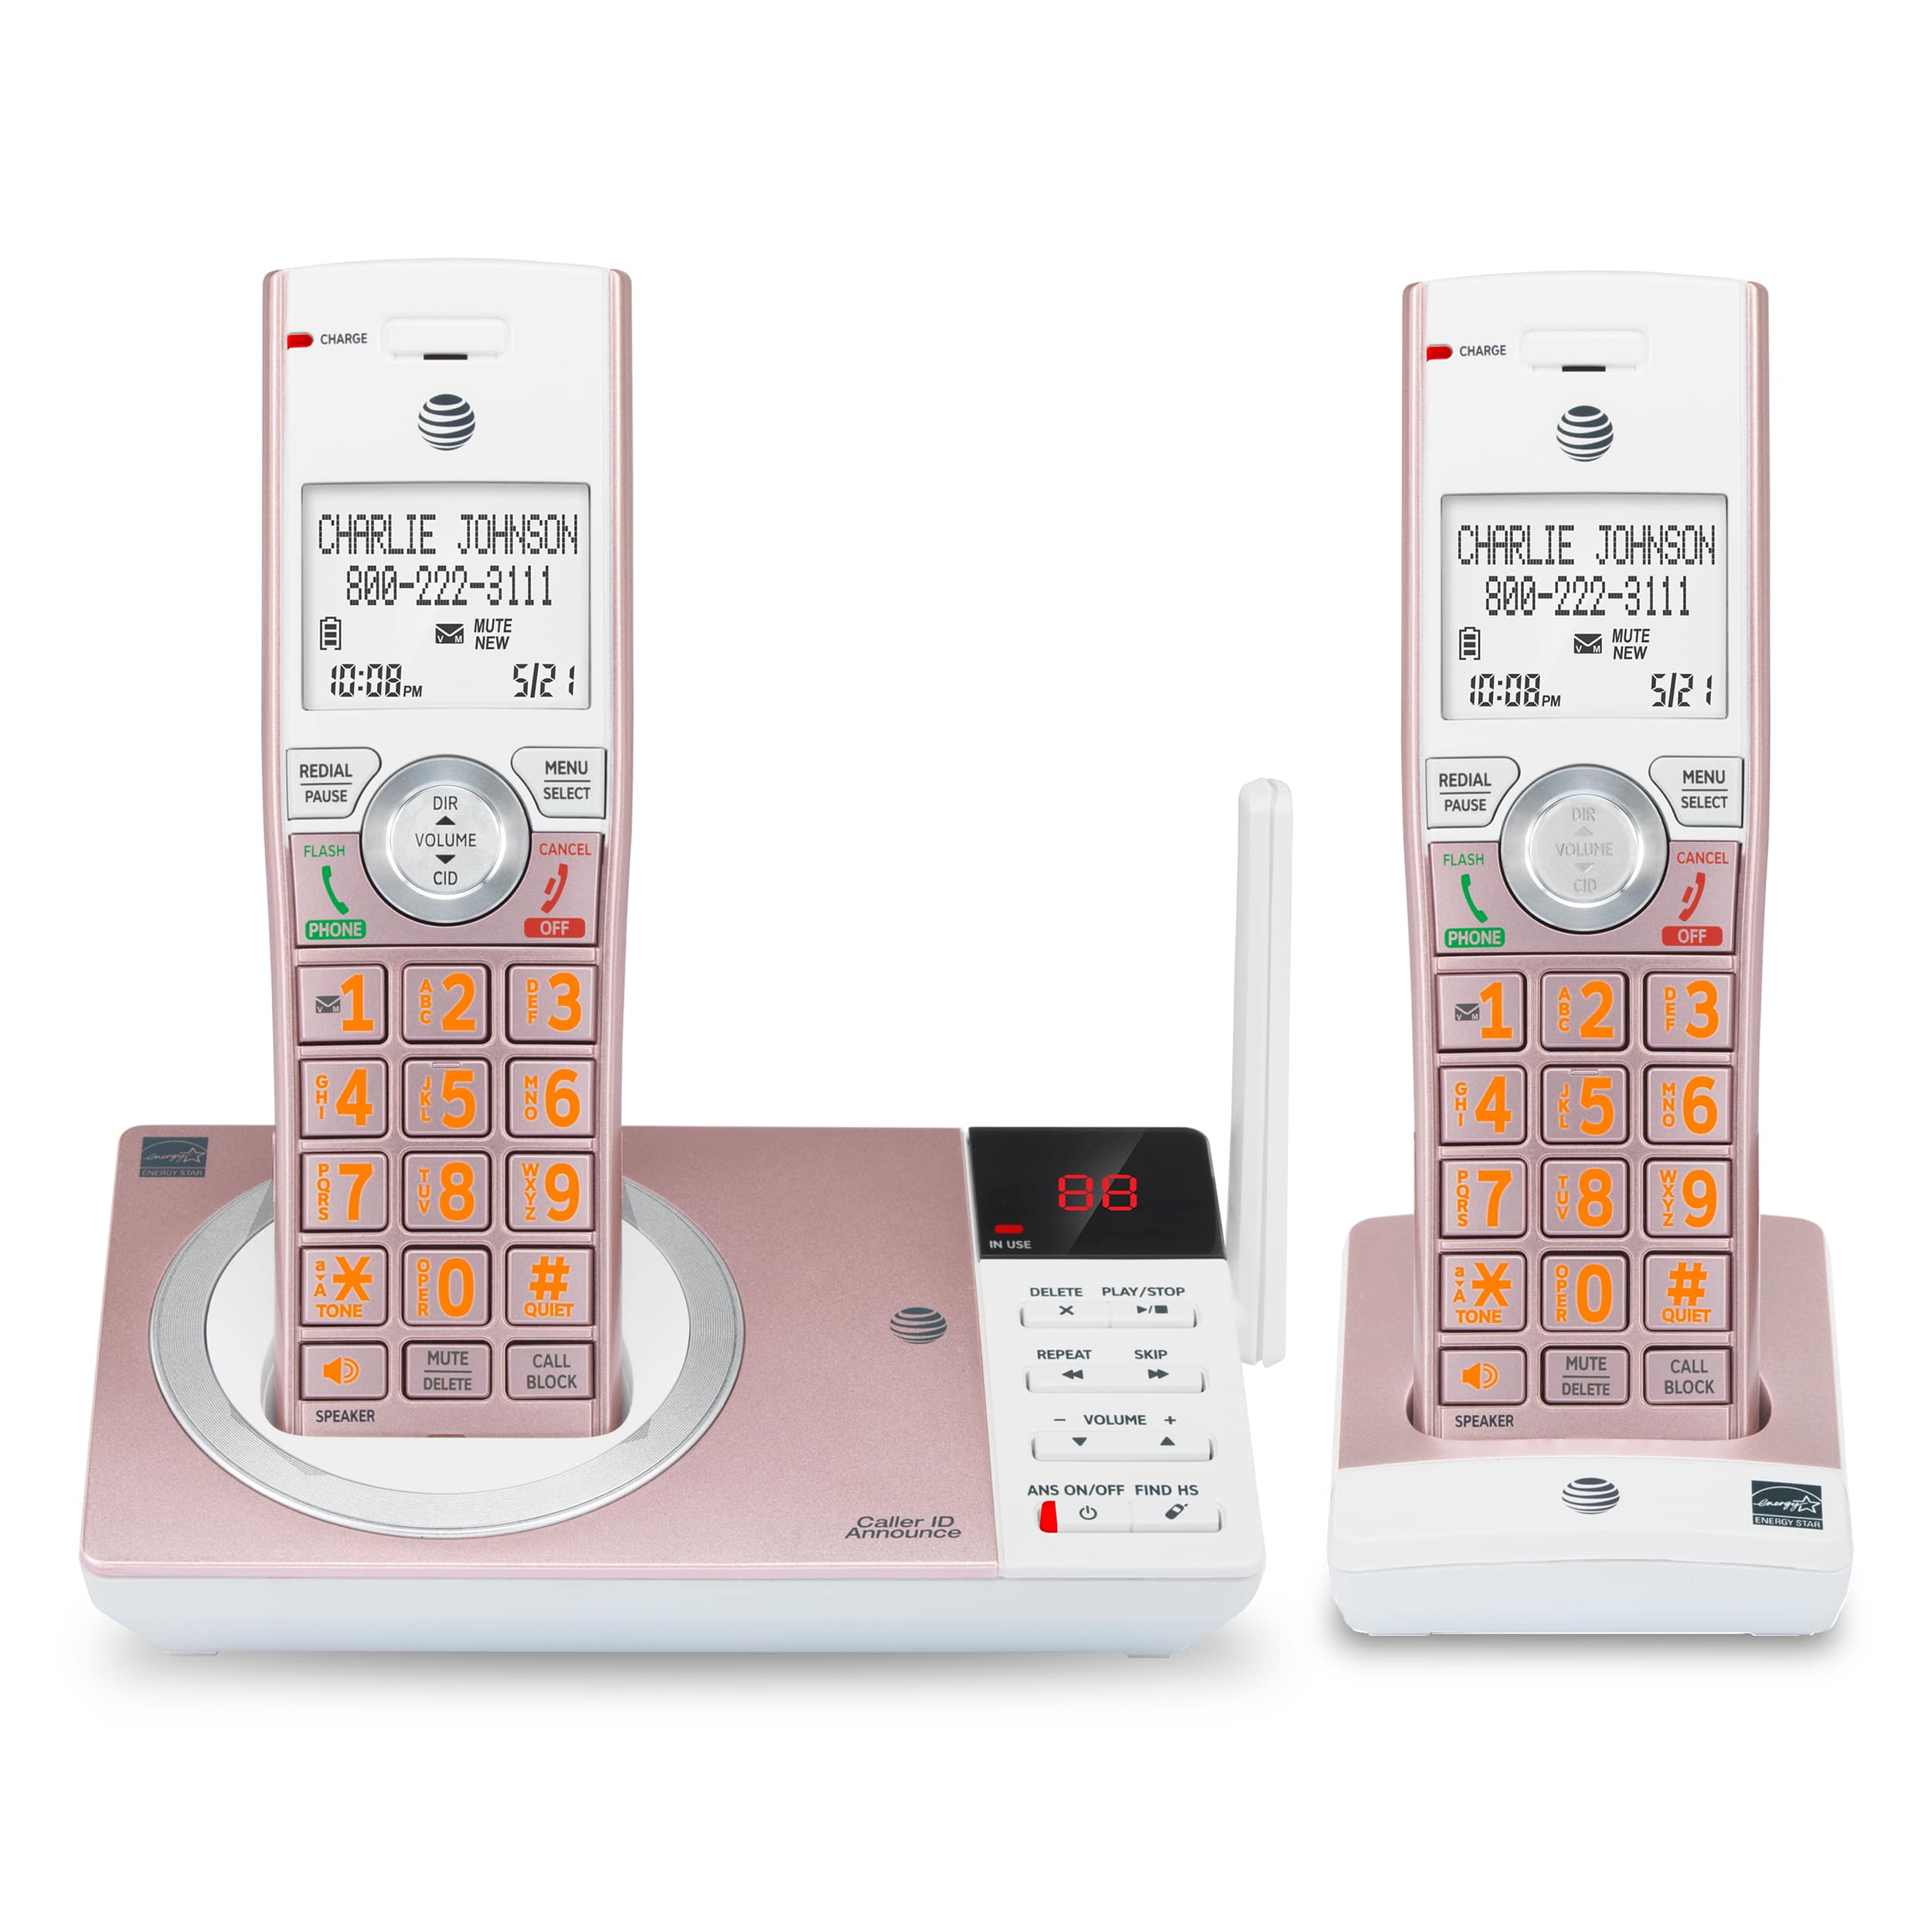 2 handset cordless answering system with smart call blocker - view 1